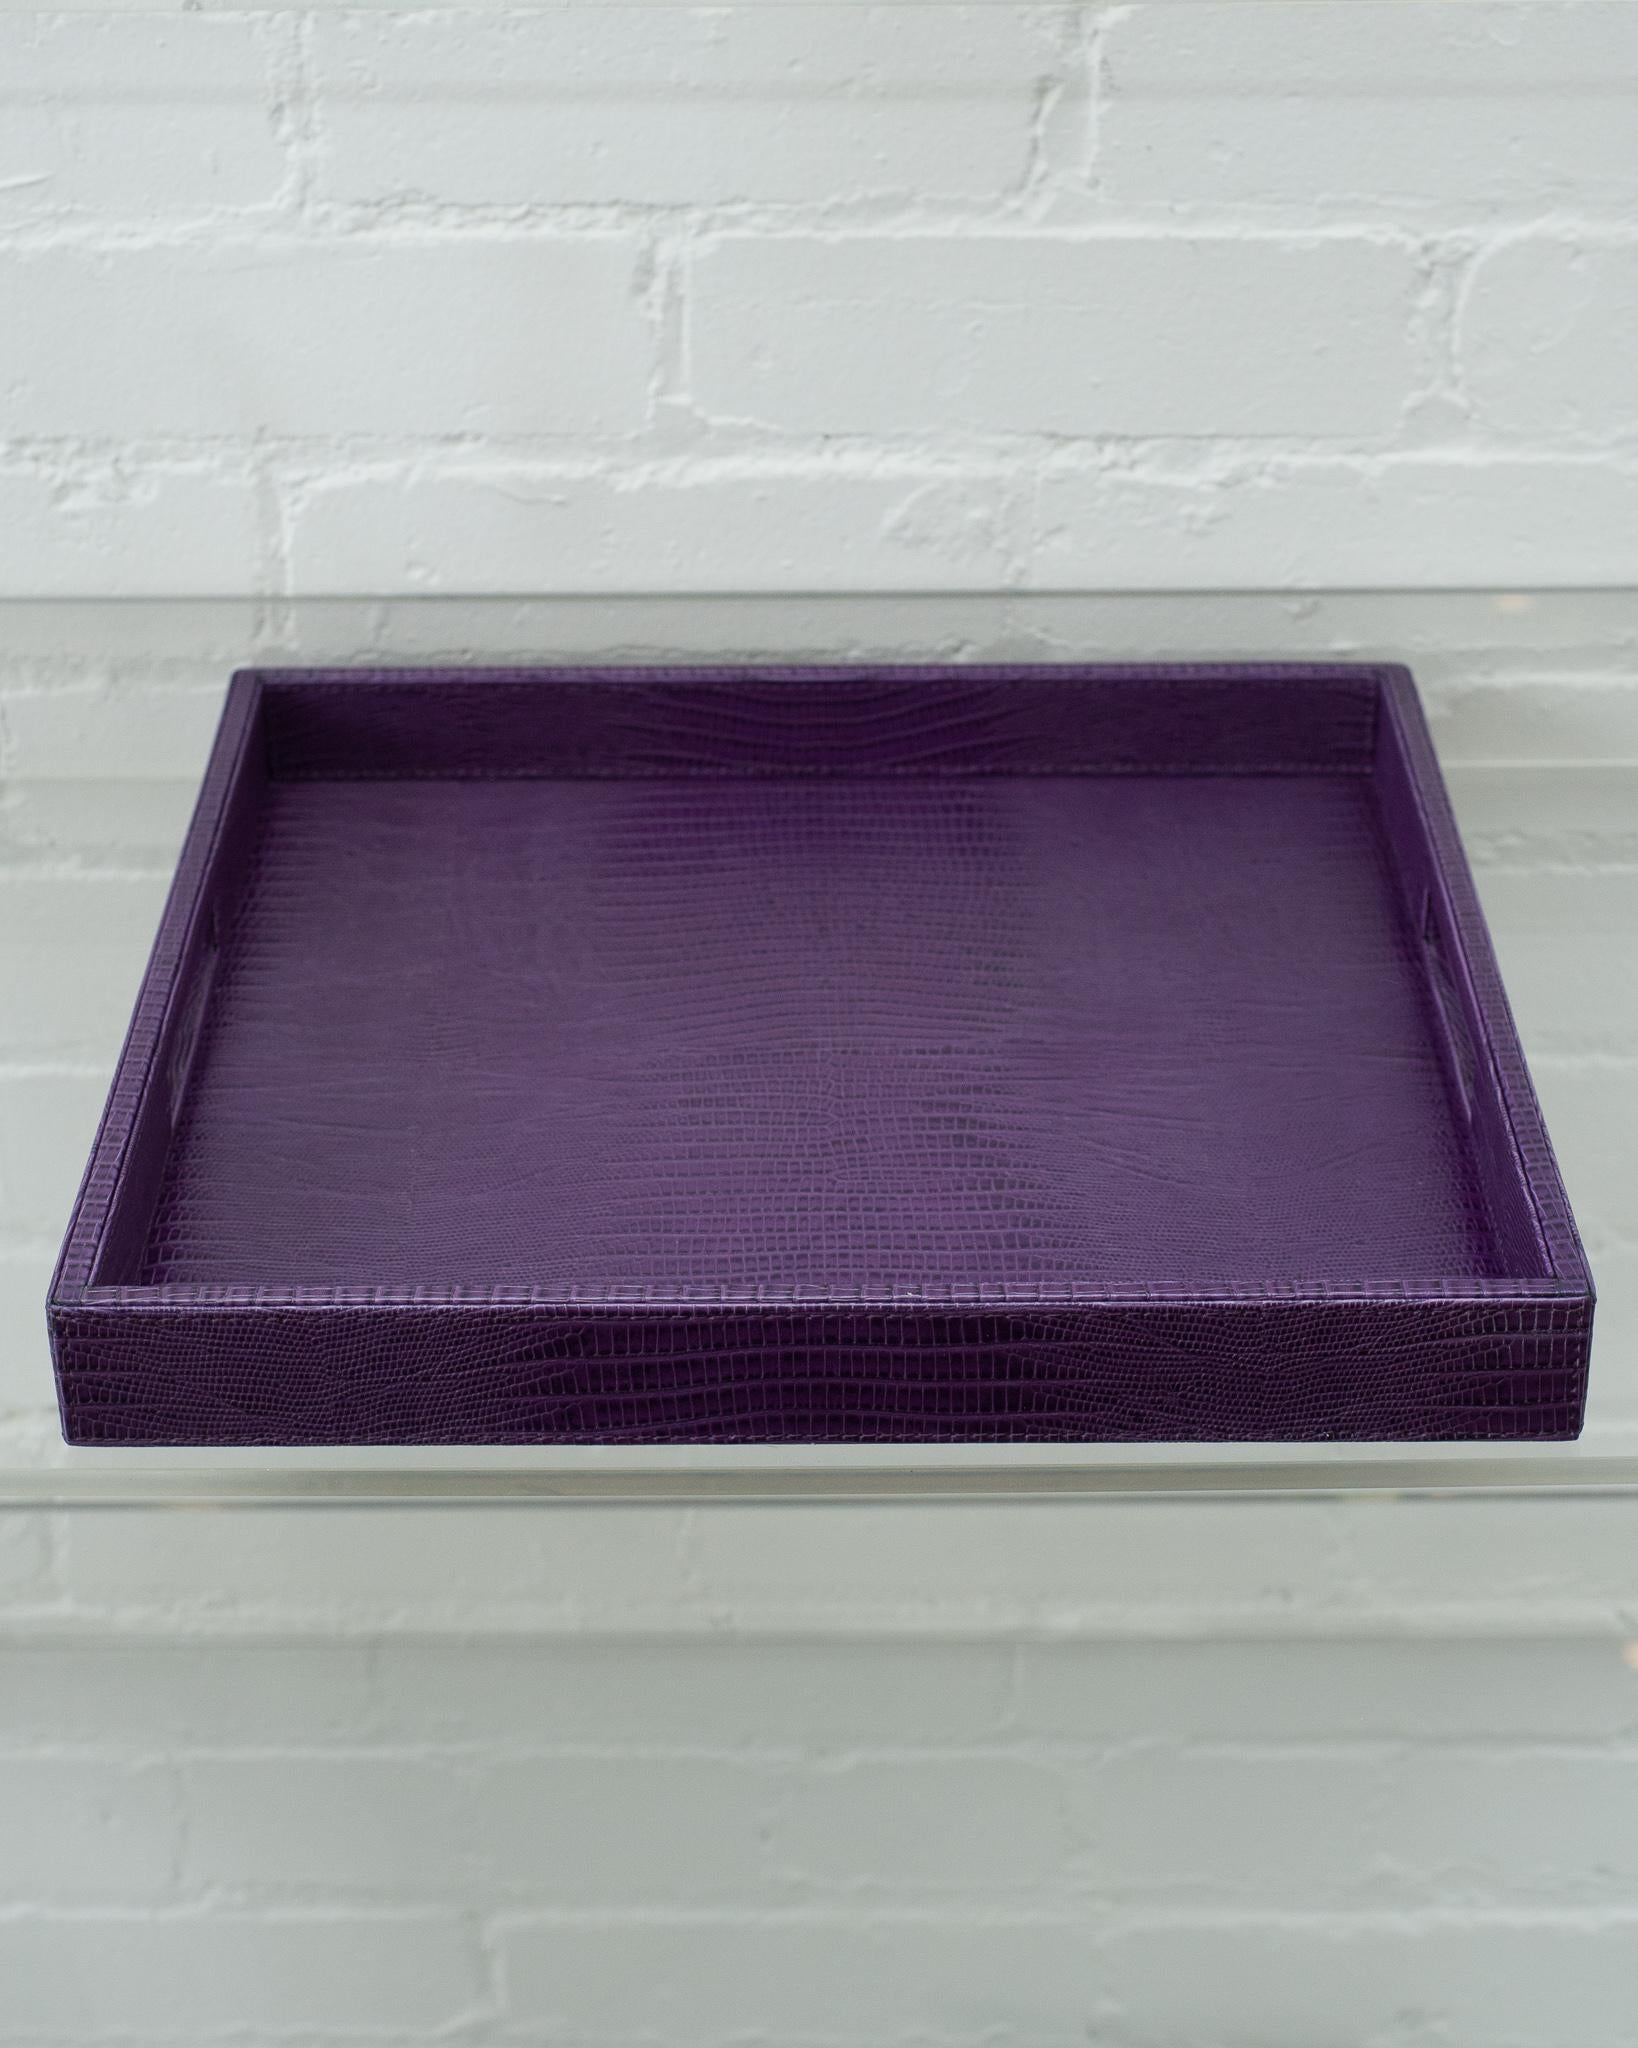 A beautiful purple lizard embossed leather tray, perfect for the desk, bedside table, or use as a serving piece. Fully wrapped in embossed leather with stitched panels, each tray has two openings for carrying.